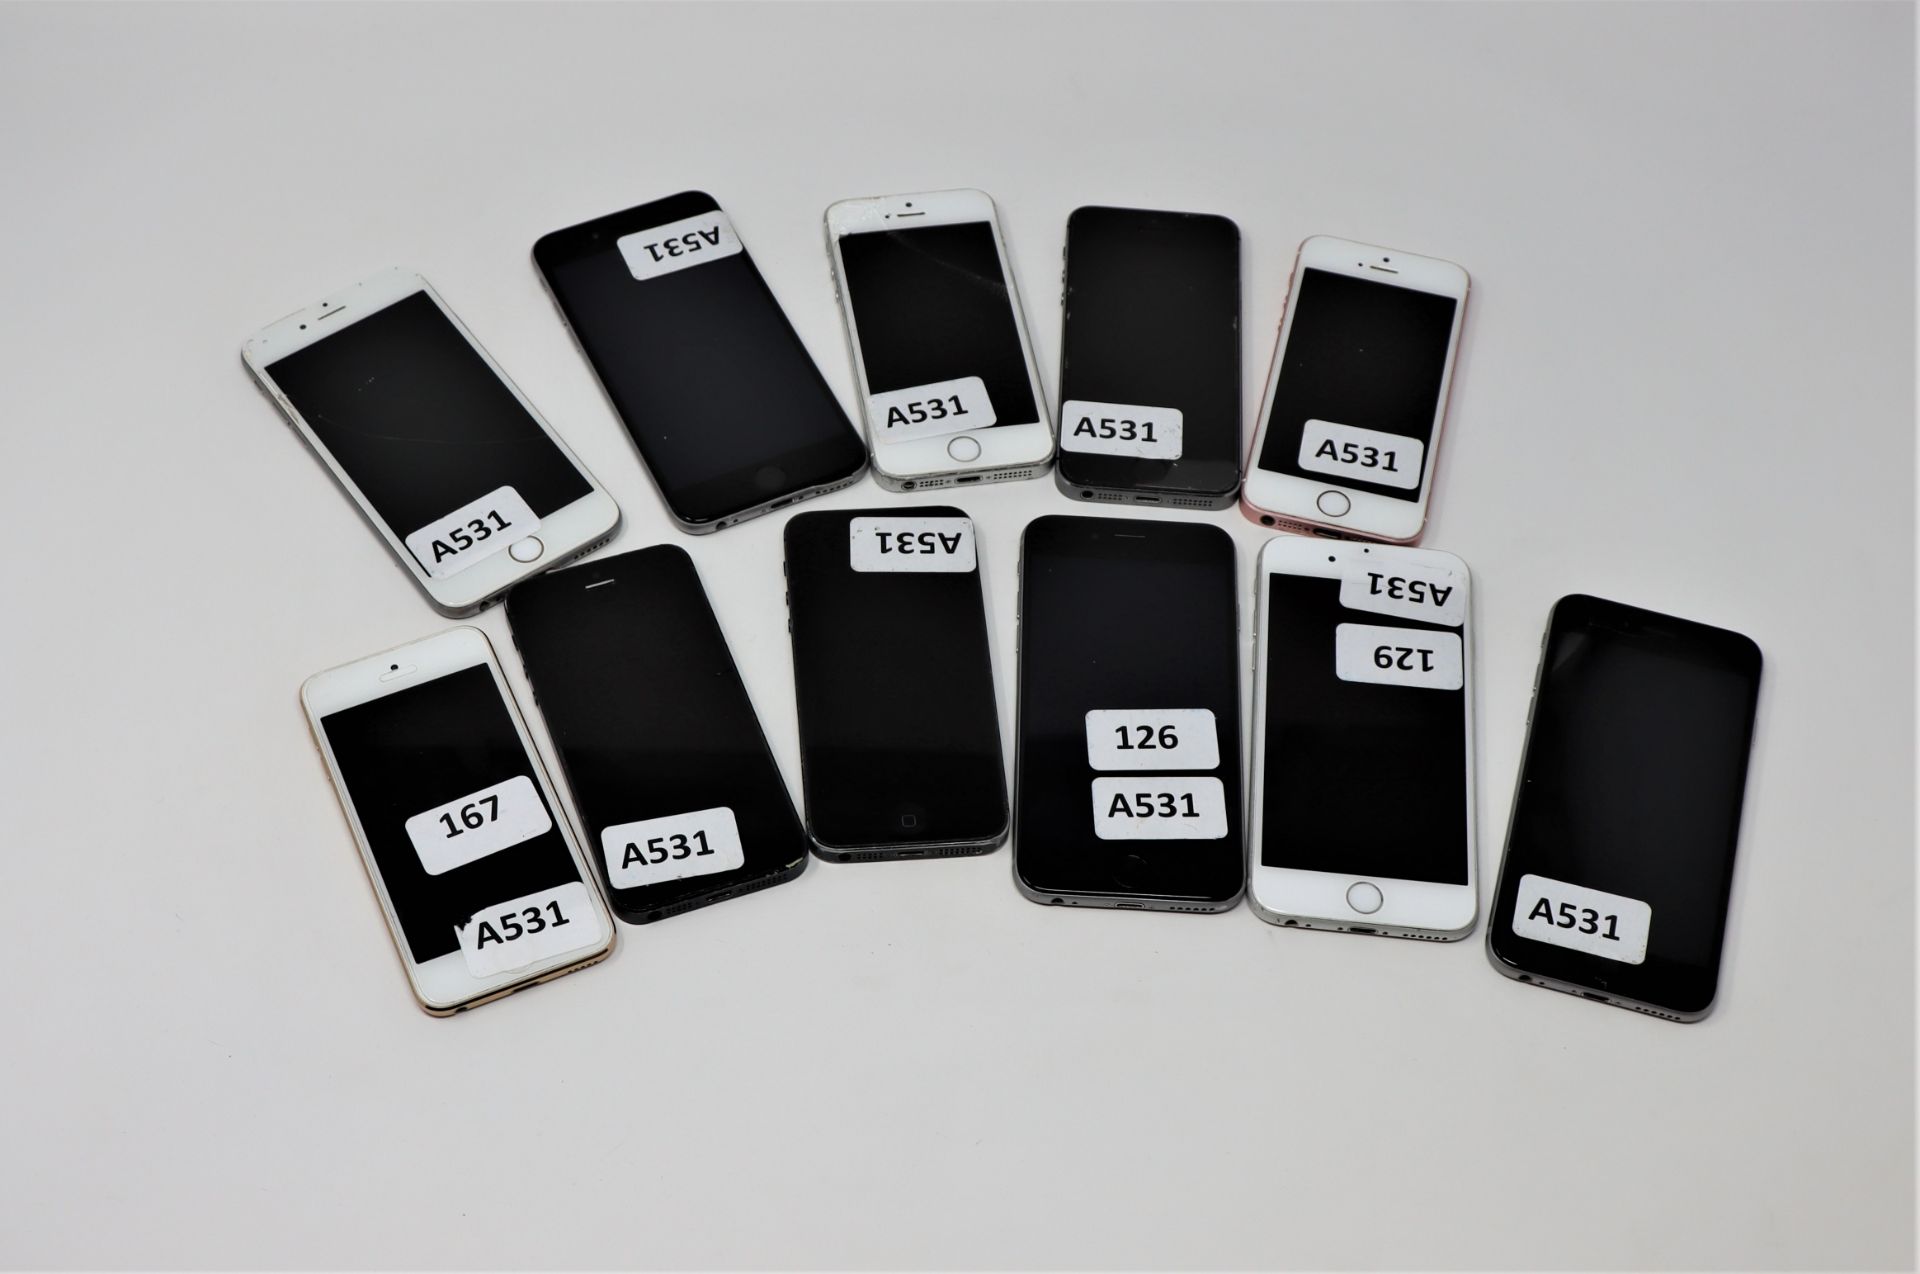 Ten pre-owned Apple iPhones and an Apple iPod Touch sold for parts; 1 x iPhone 6 (GSM/North